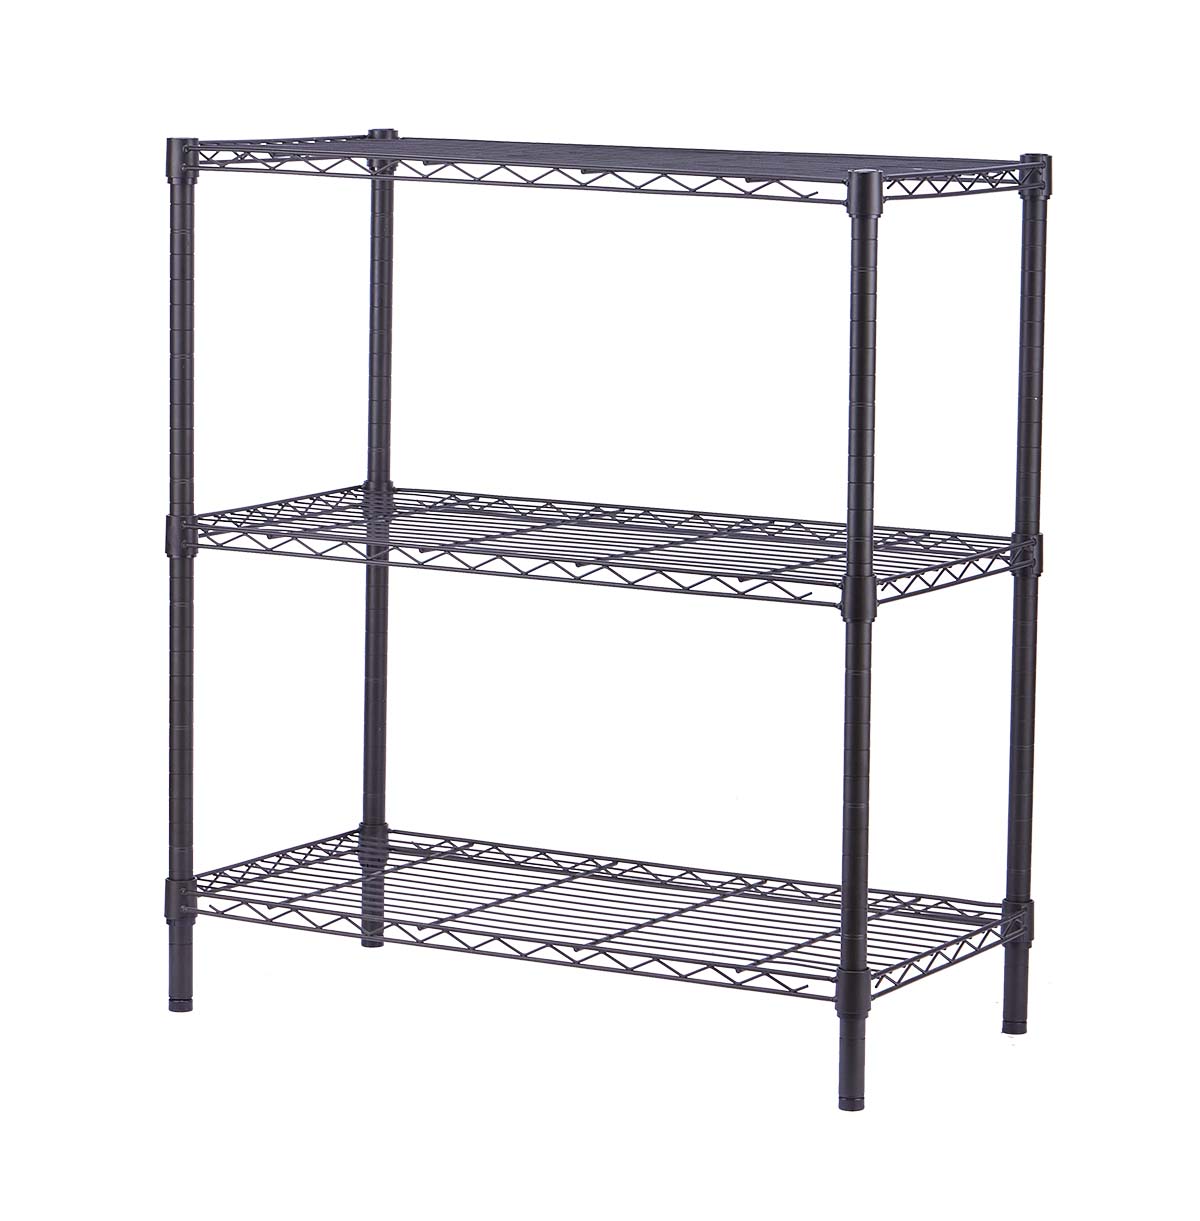 3 tier wire shelving unit Solution